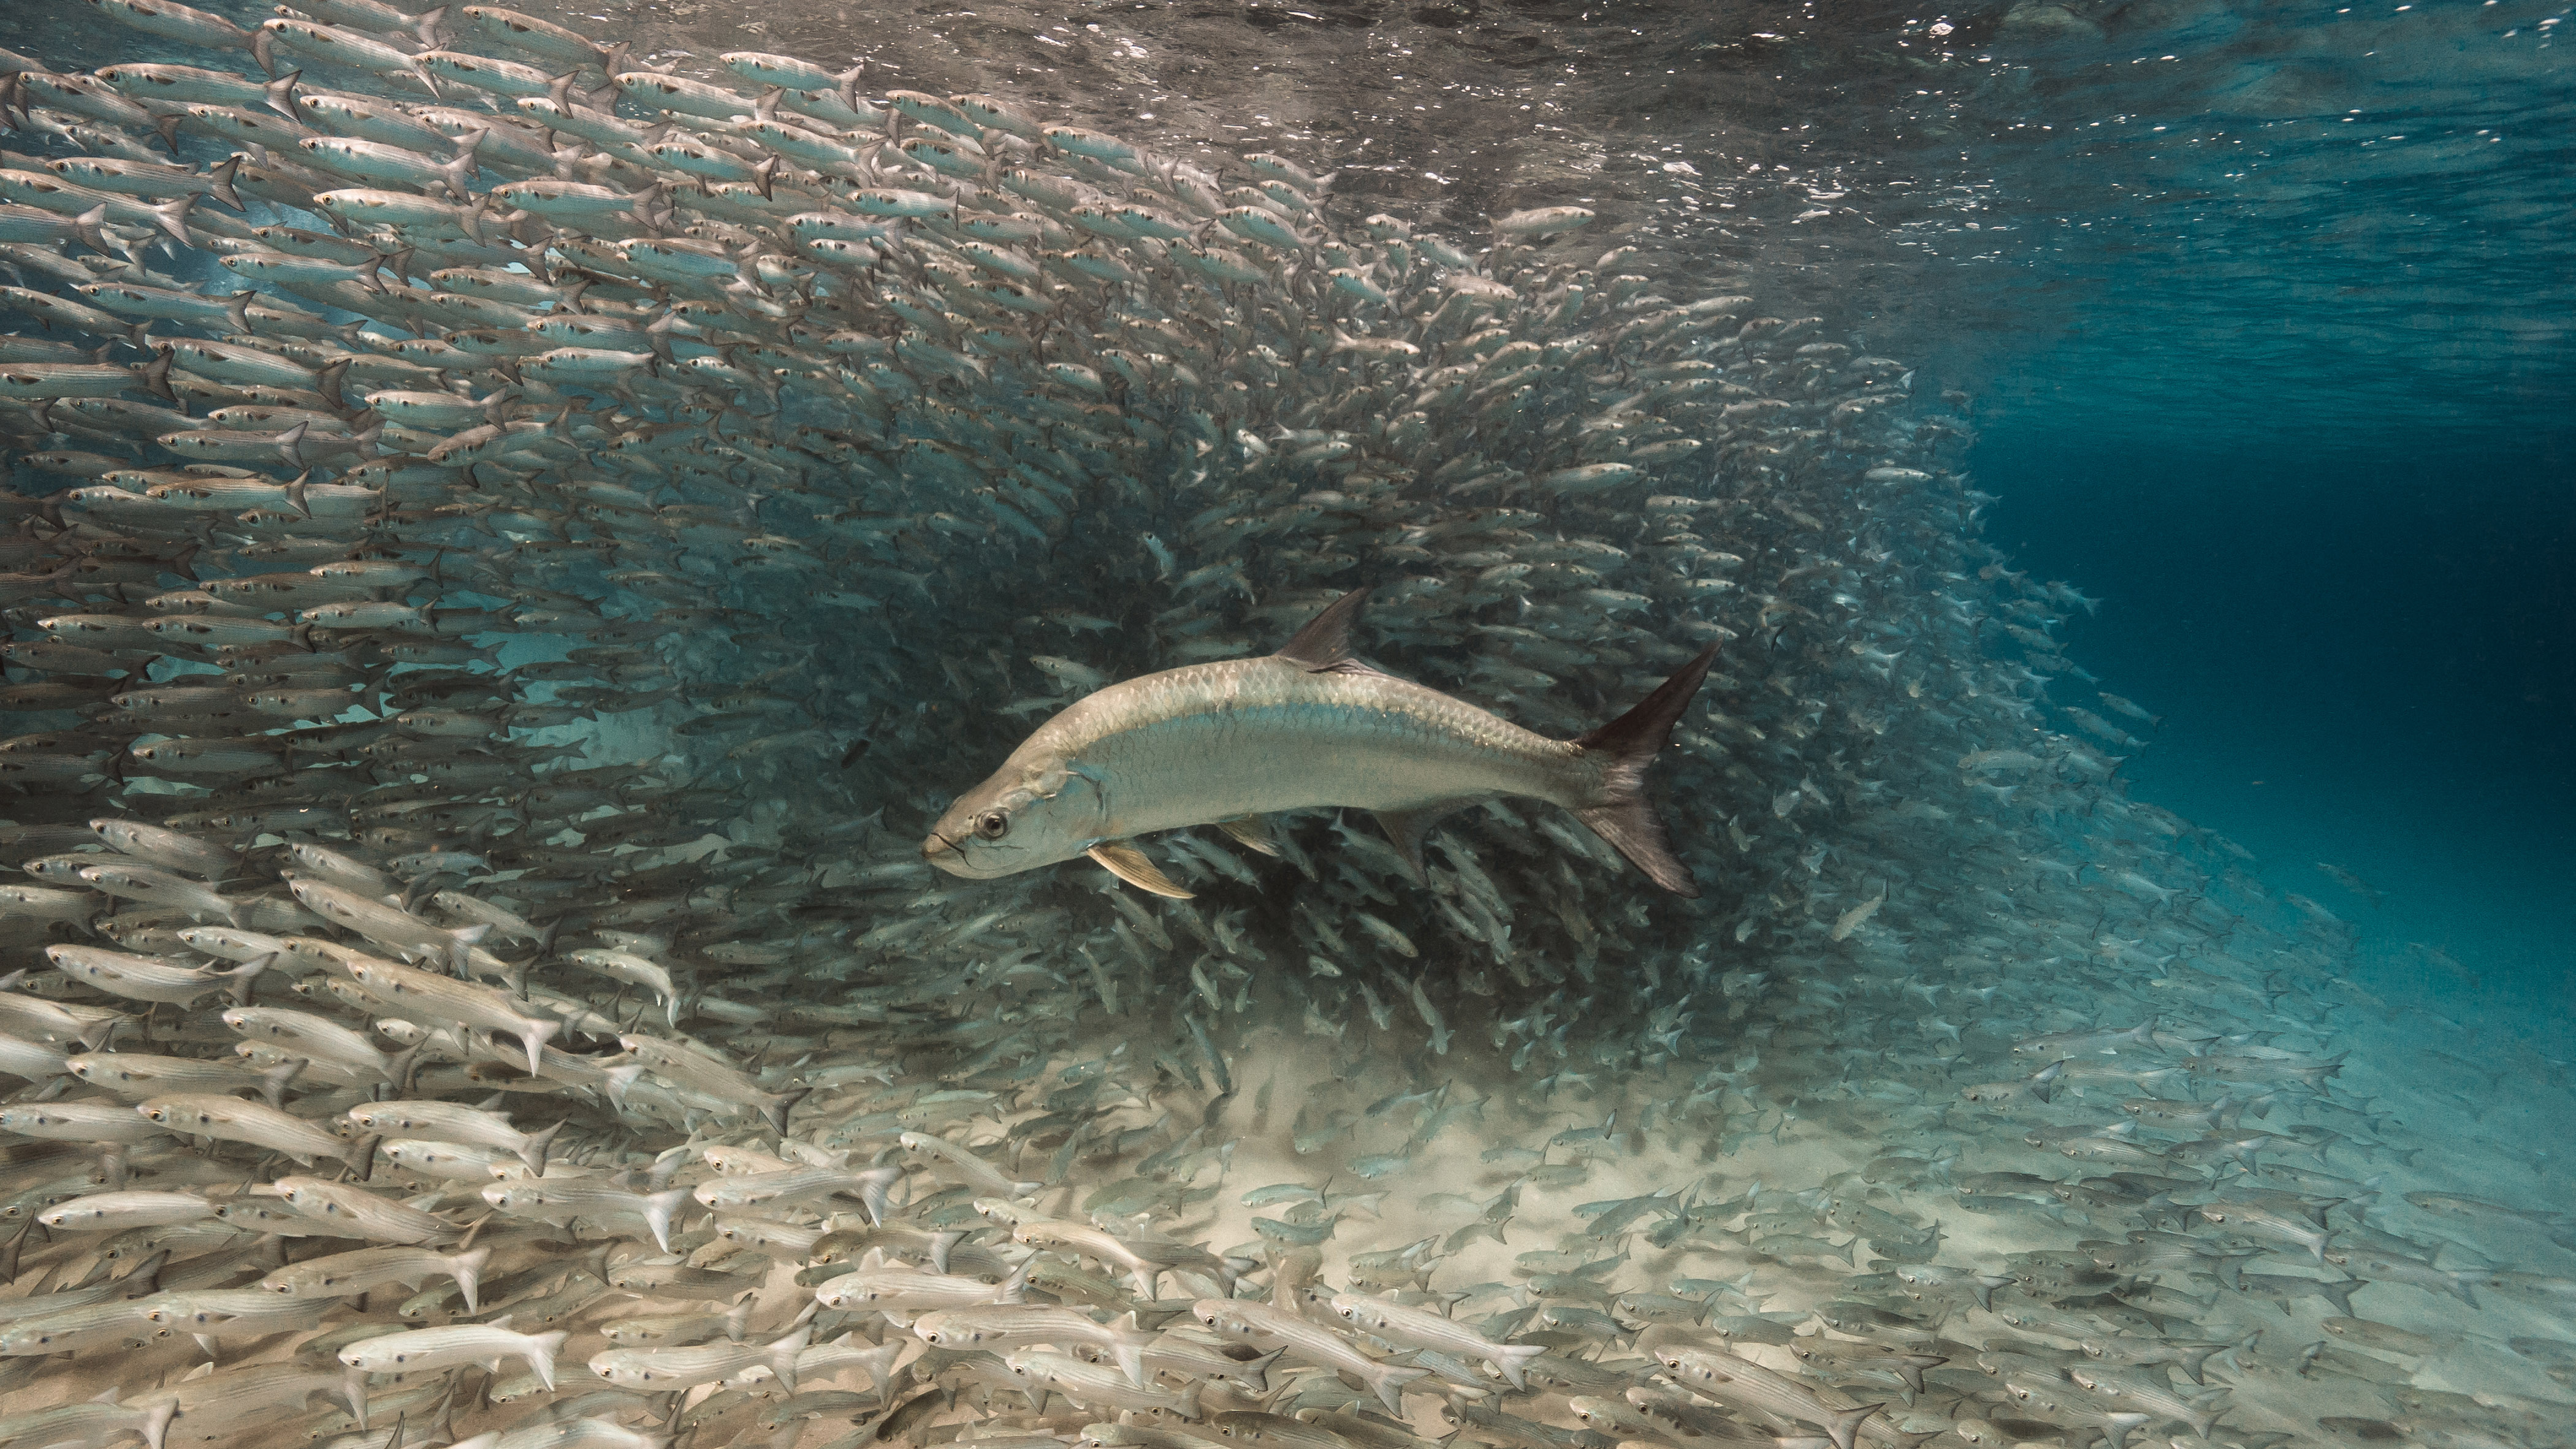 A swing and a miss for this tarpon. The mullet rely on safety in numbers, evasive maneuvers, and "swamping," or overwhelming the predator's ability to identify and attack a single individual. Fish that prey on forage species typically catch food just once in every 10 tries. Conversely, schooling forage fish are easy targets for nets, which makes them vulnerable to overfishing. 